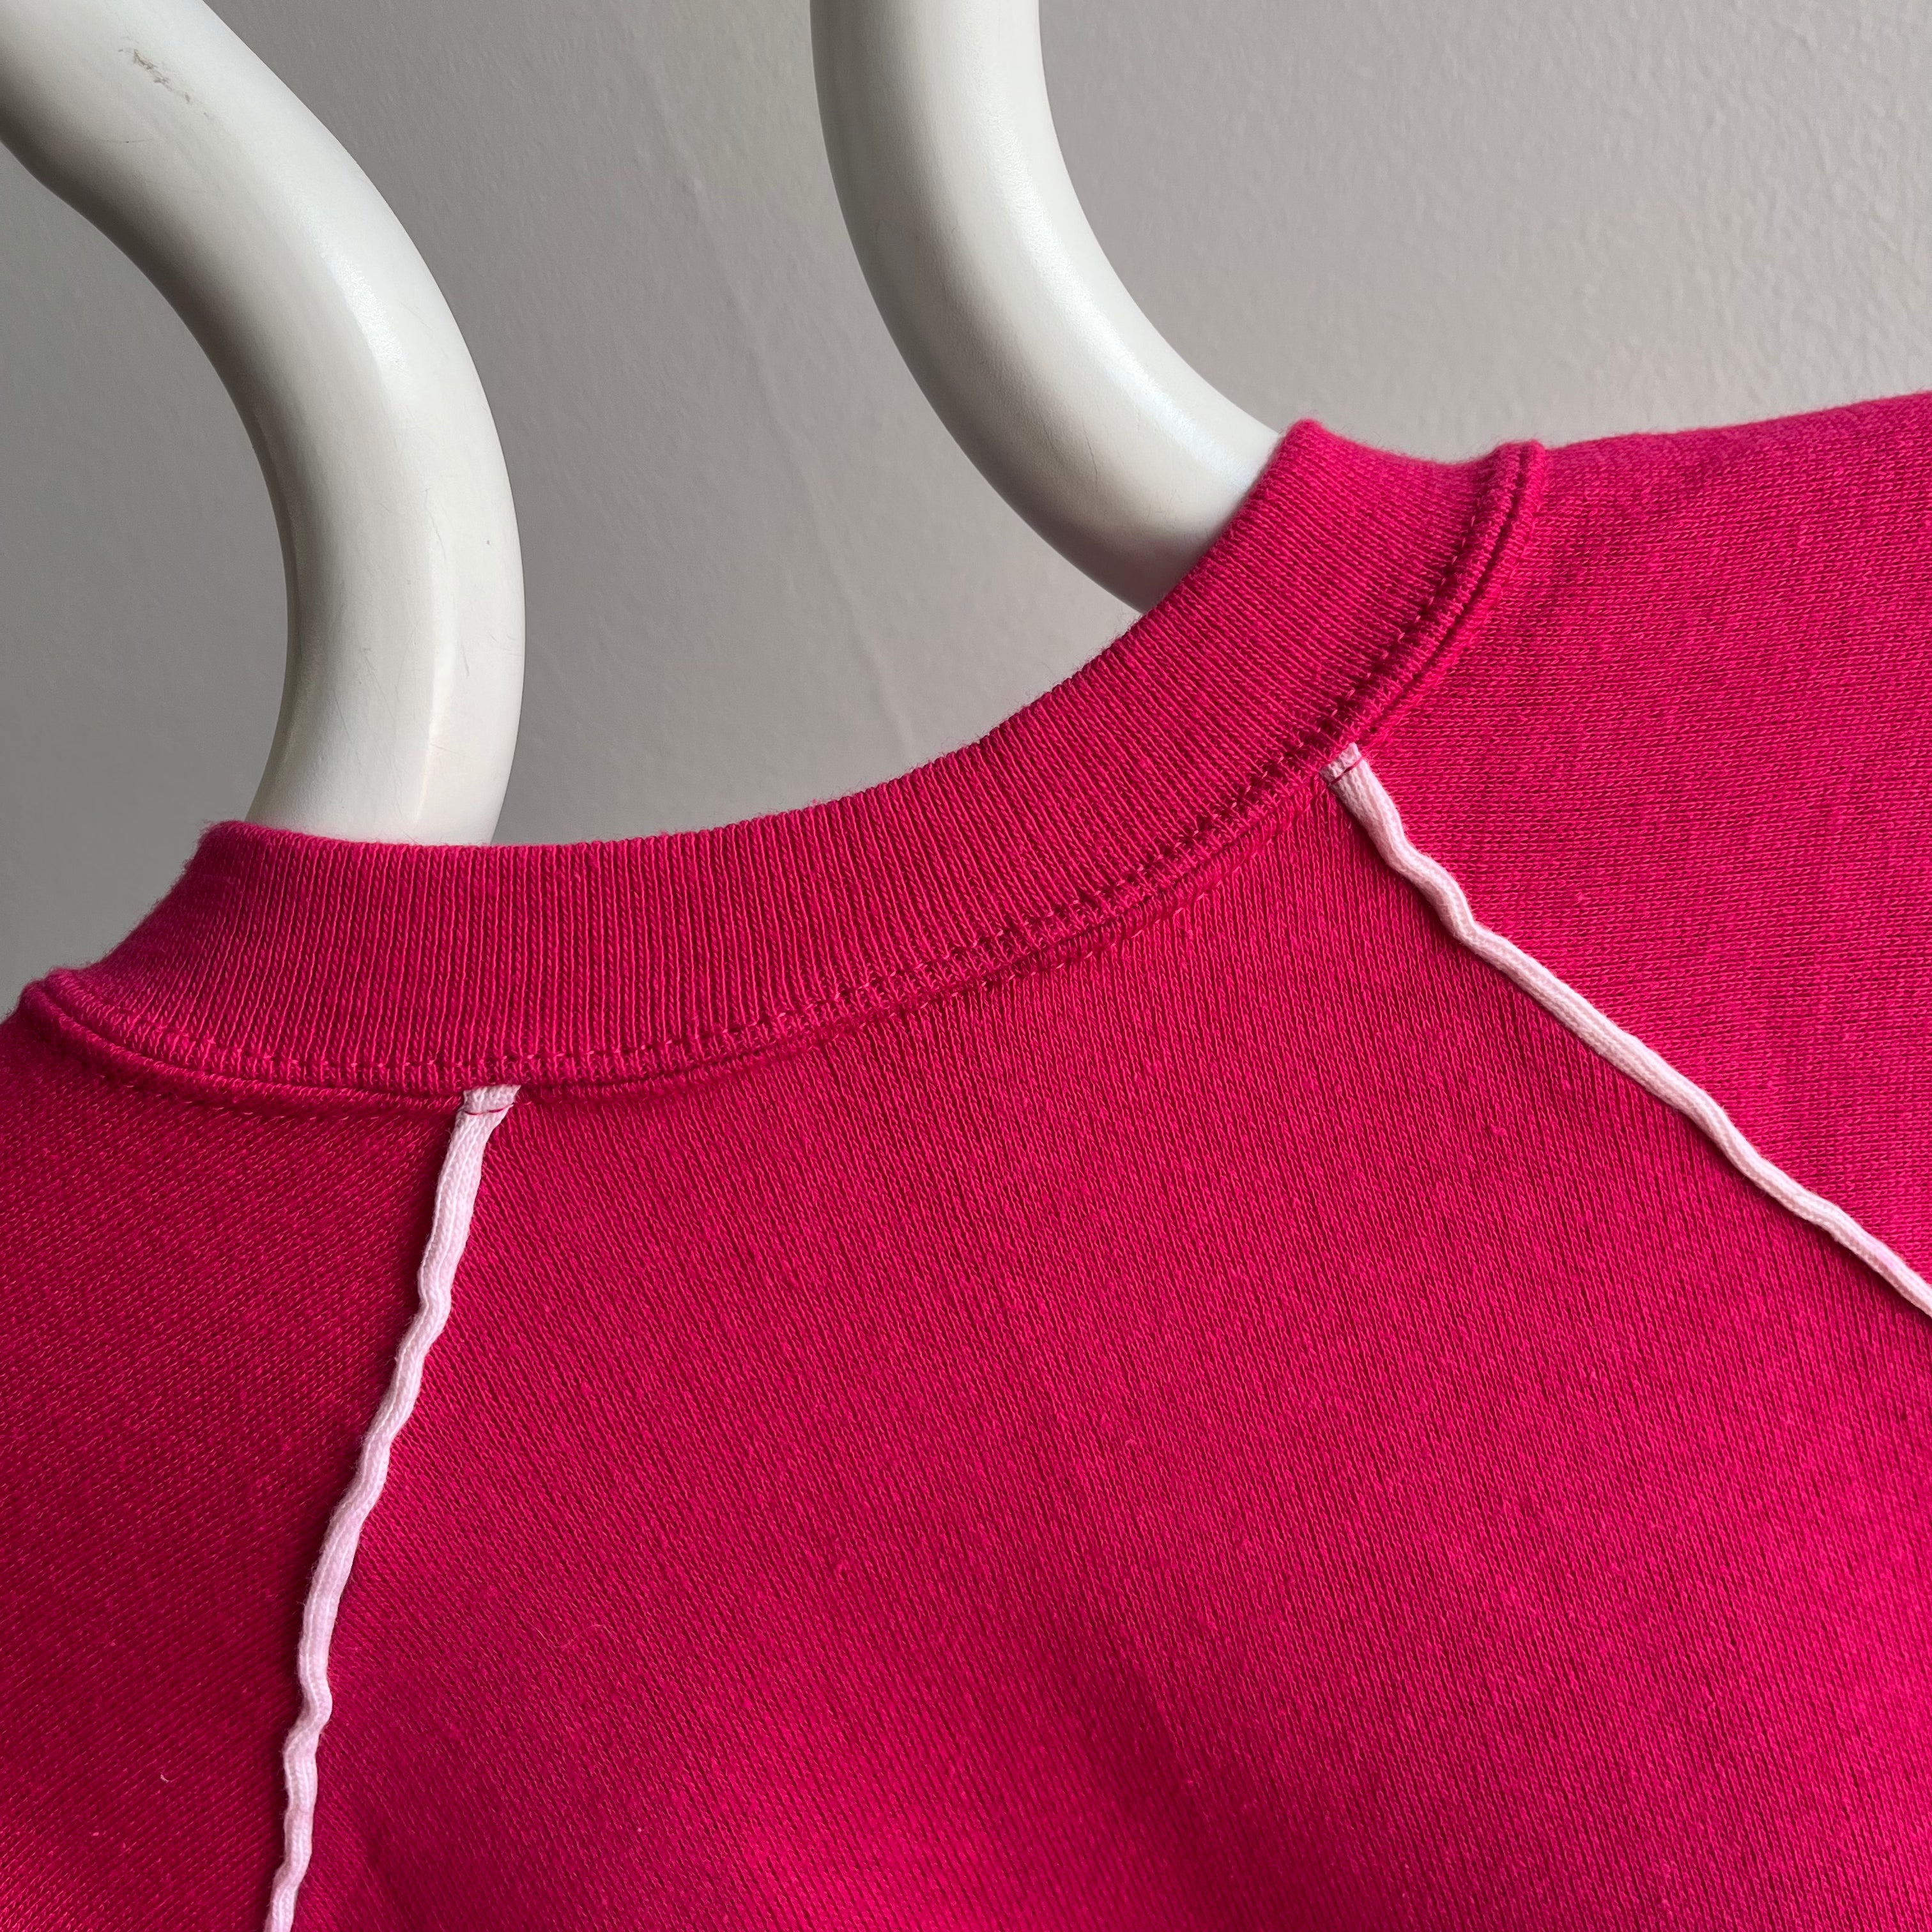 1980s Never Worn (Except this Pic) Hot Pink V-Neck Smaller Sweatshirt